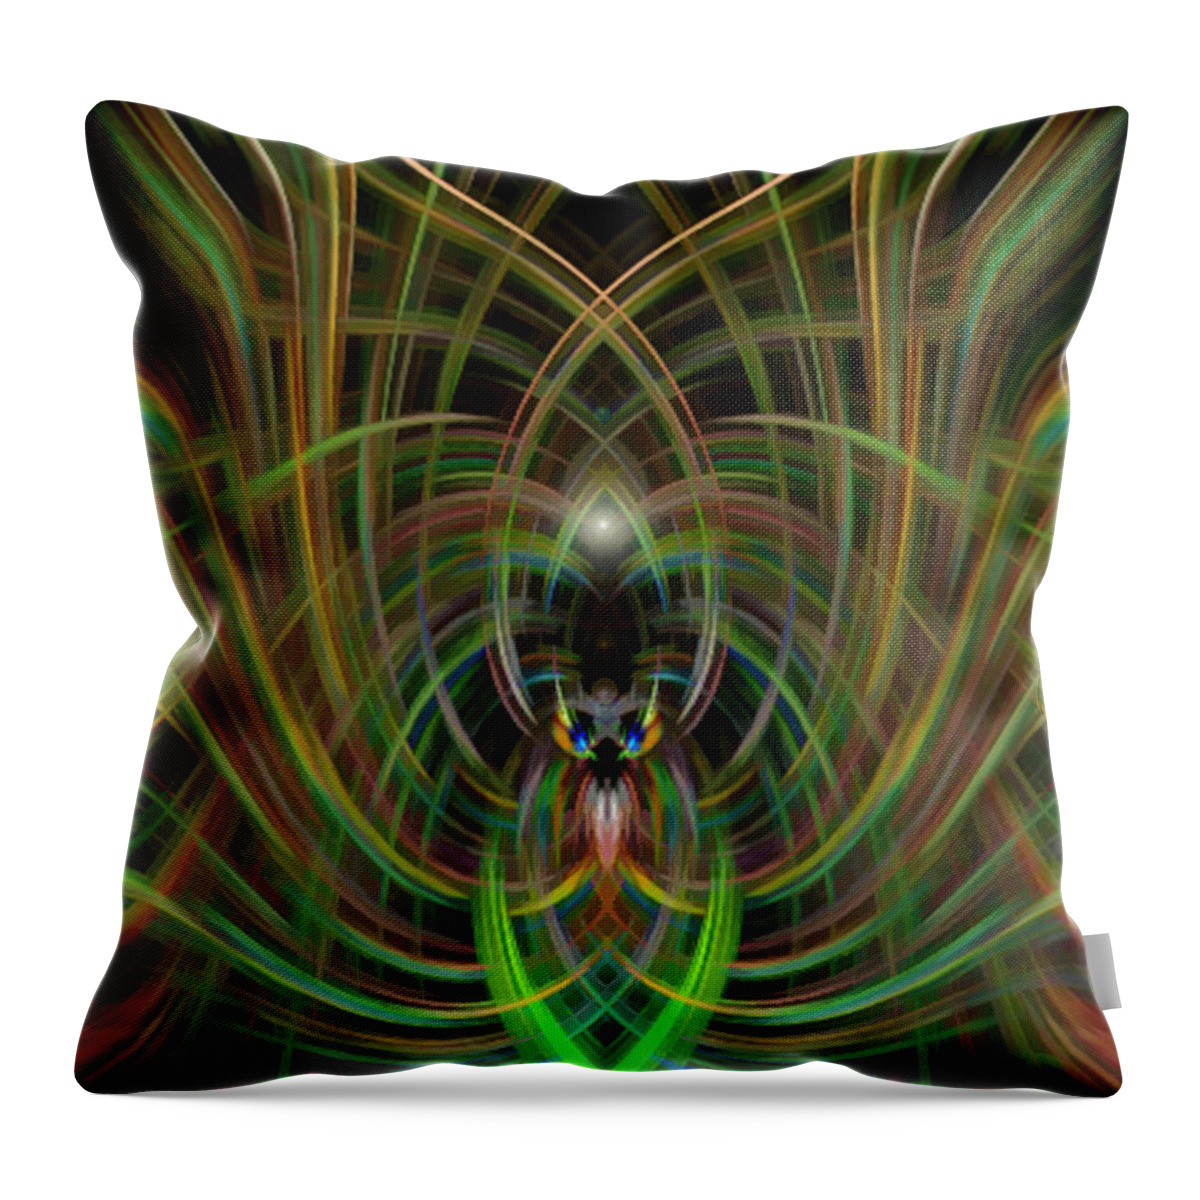 Green Throw Pillow featuring the photograph Winged Bug by Cherie Duran